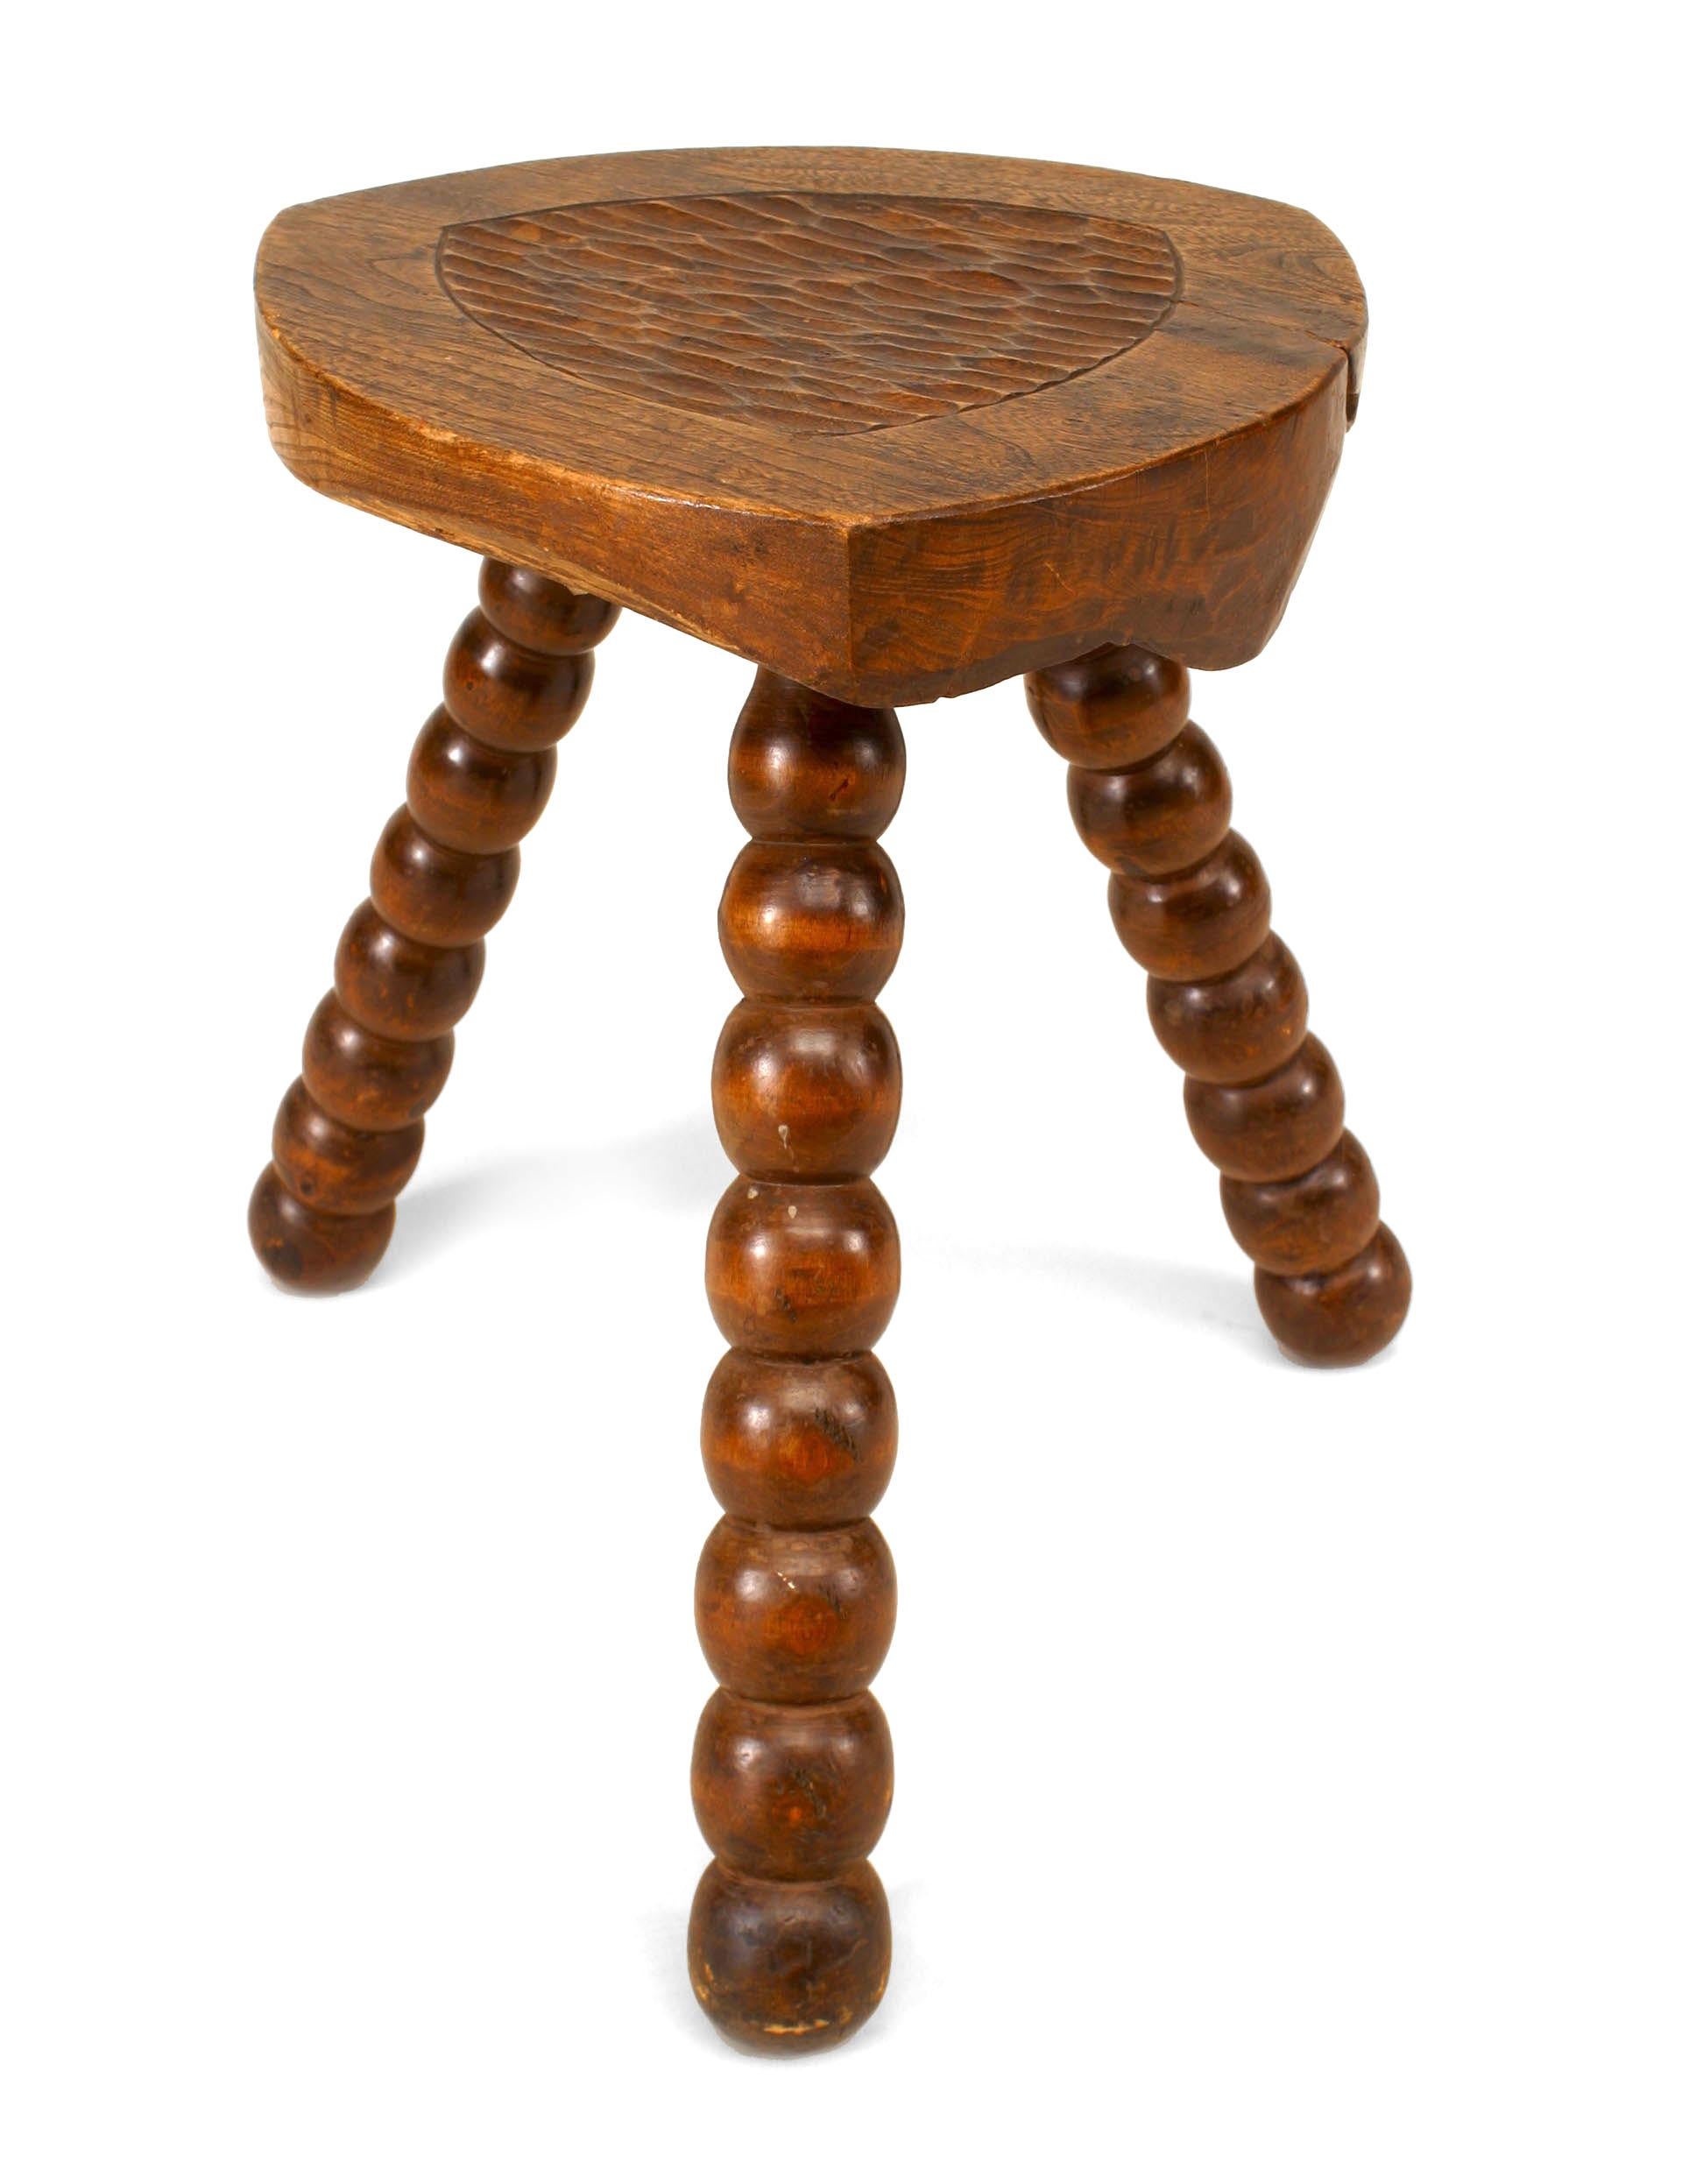 Five turn of the century English Renaissance style walnut stools, each with three spool legs and a triangular wooden seat (5 - PRICED EACH).